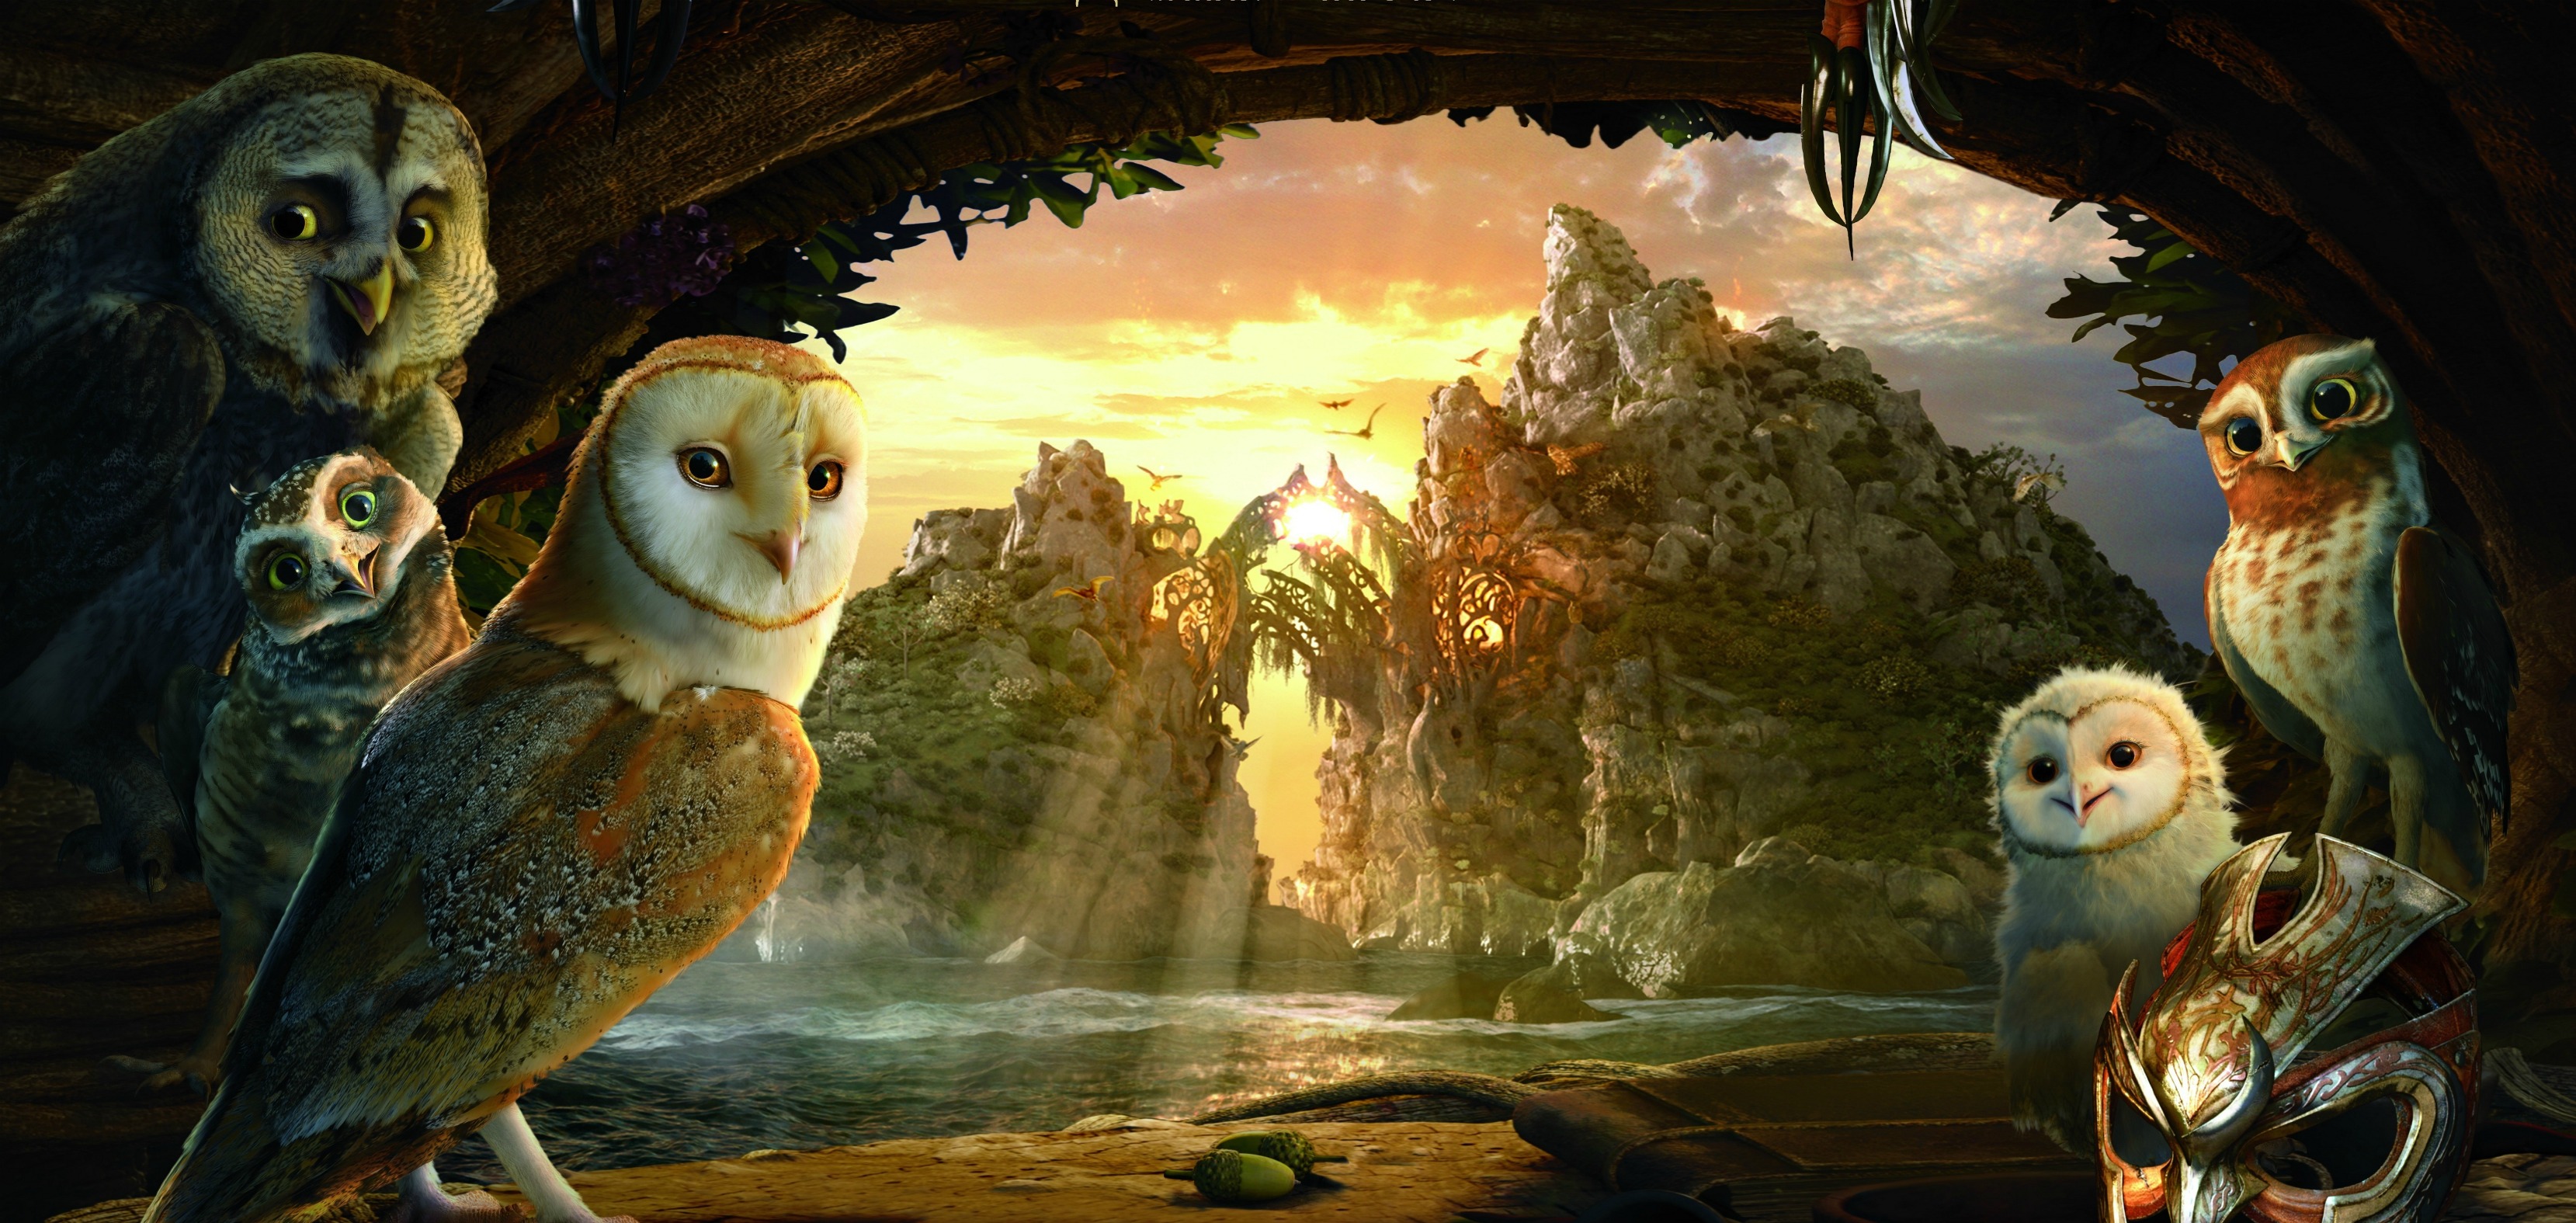 Legend of the Guardians: The Owls of Ga'Hoole HD Wallpaper